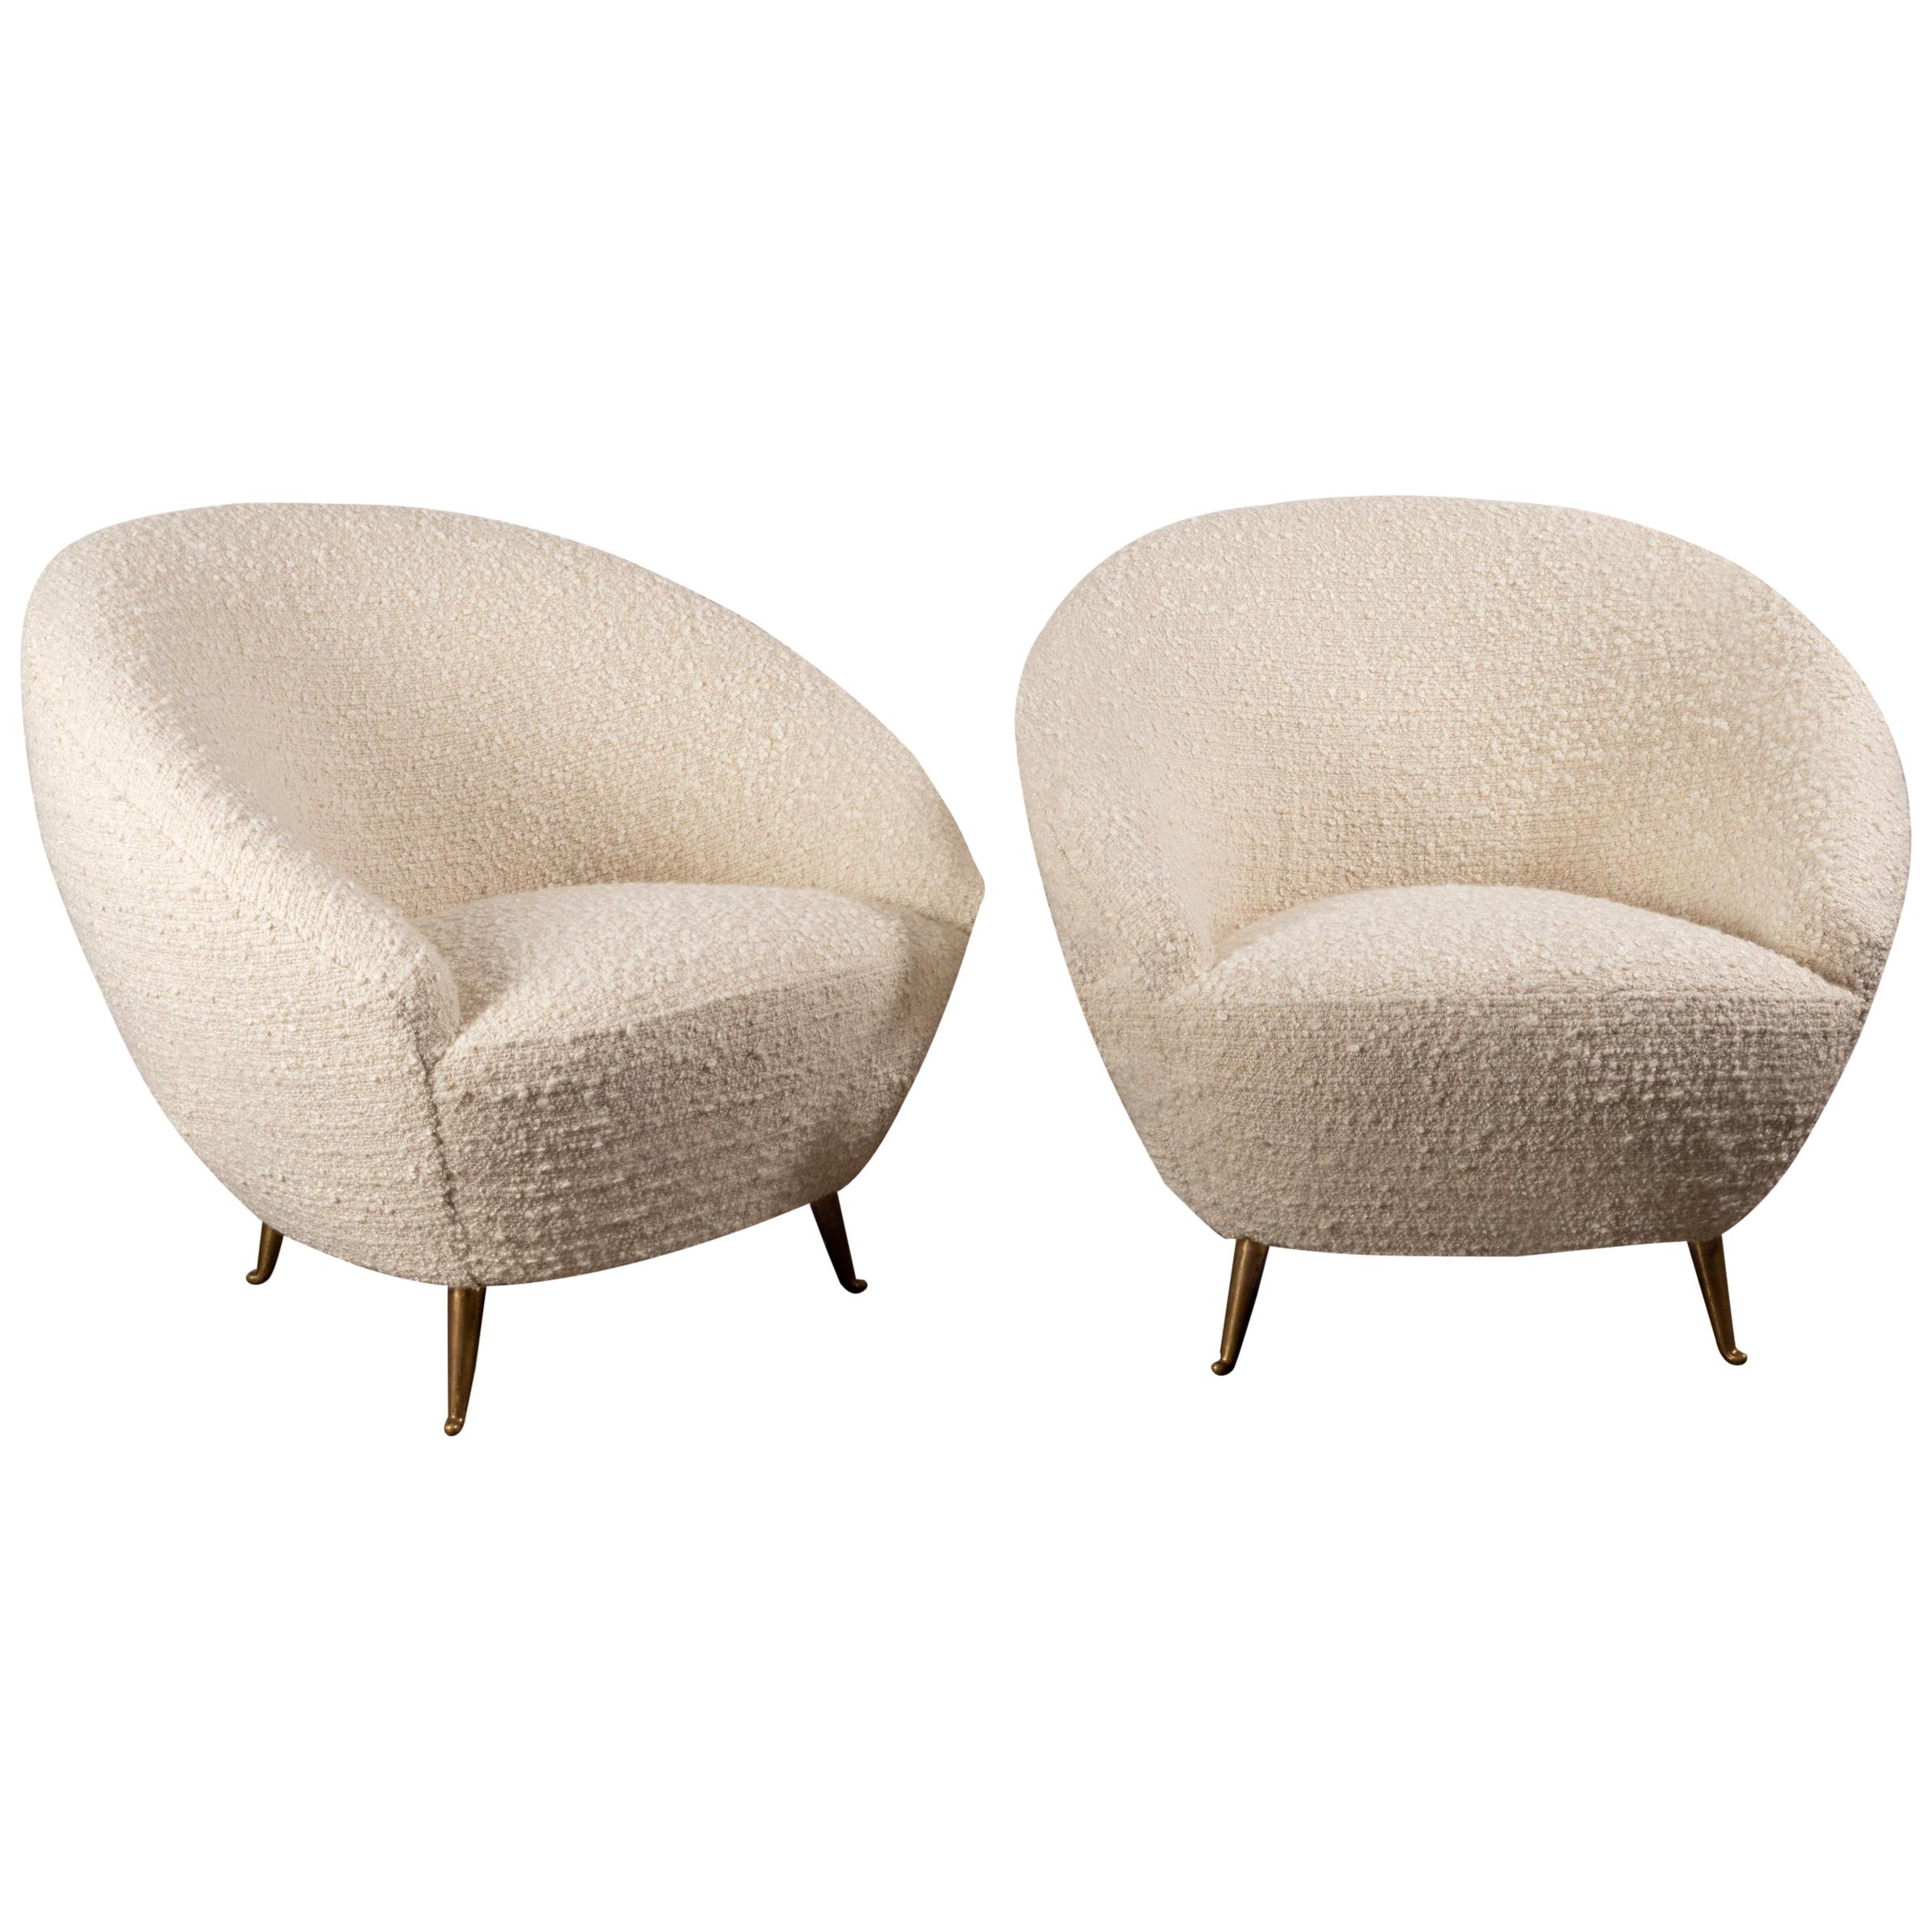 Pair of Curved Lounge Chairs attributed to Federico Munari, Italy, 1950s